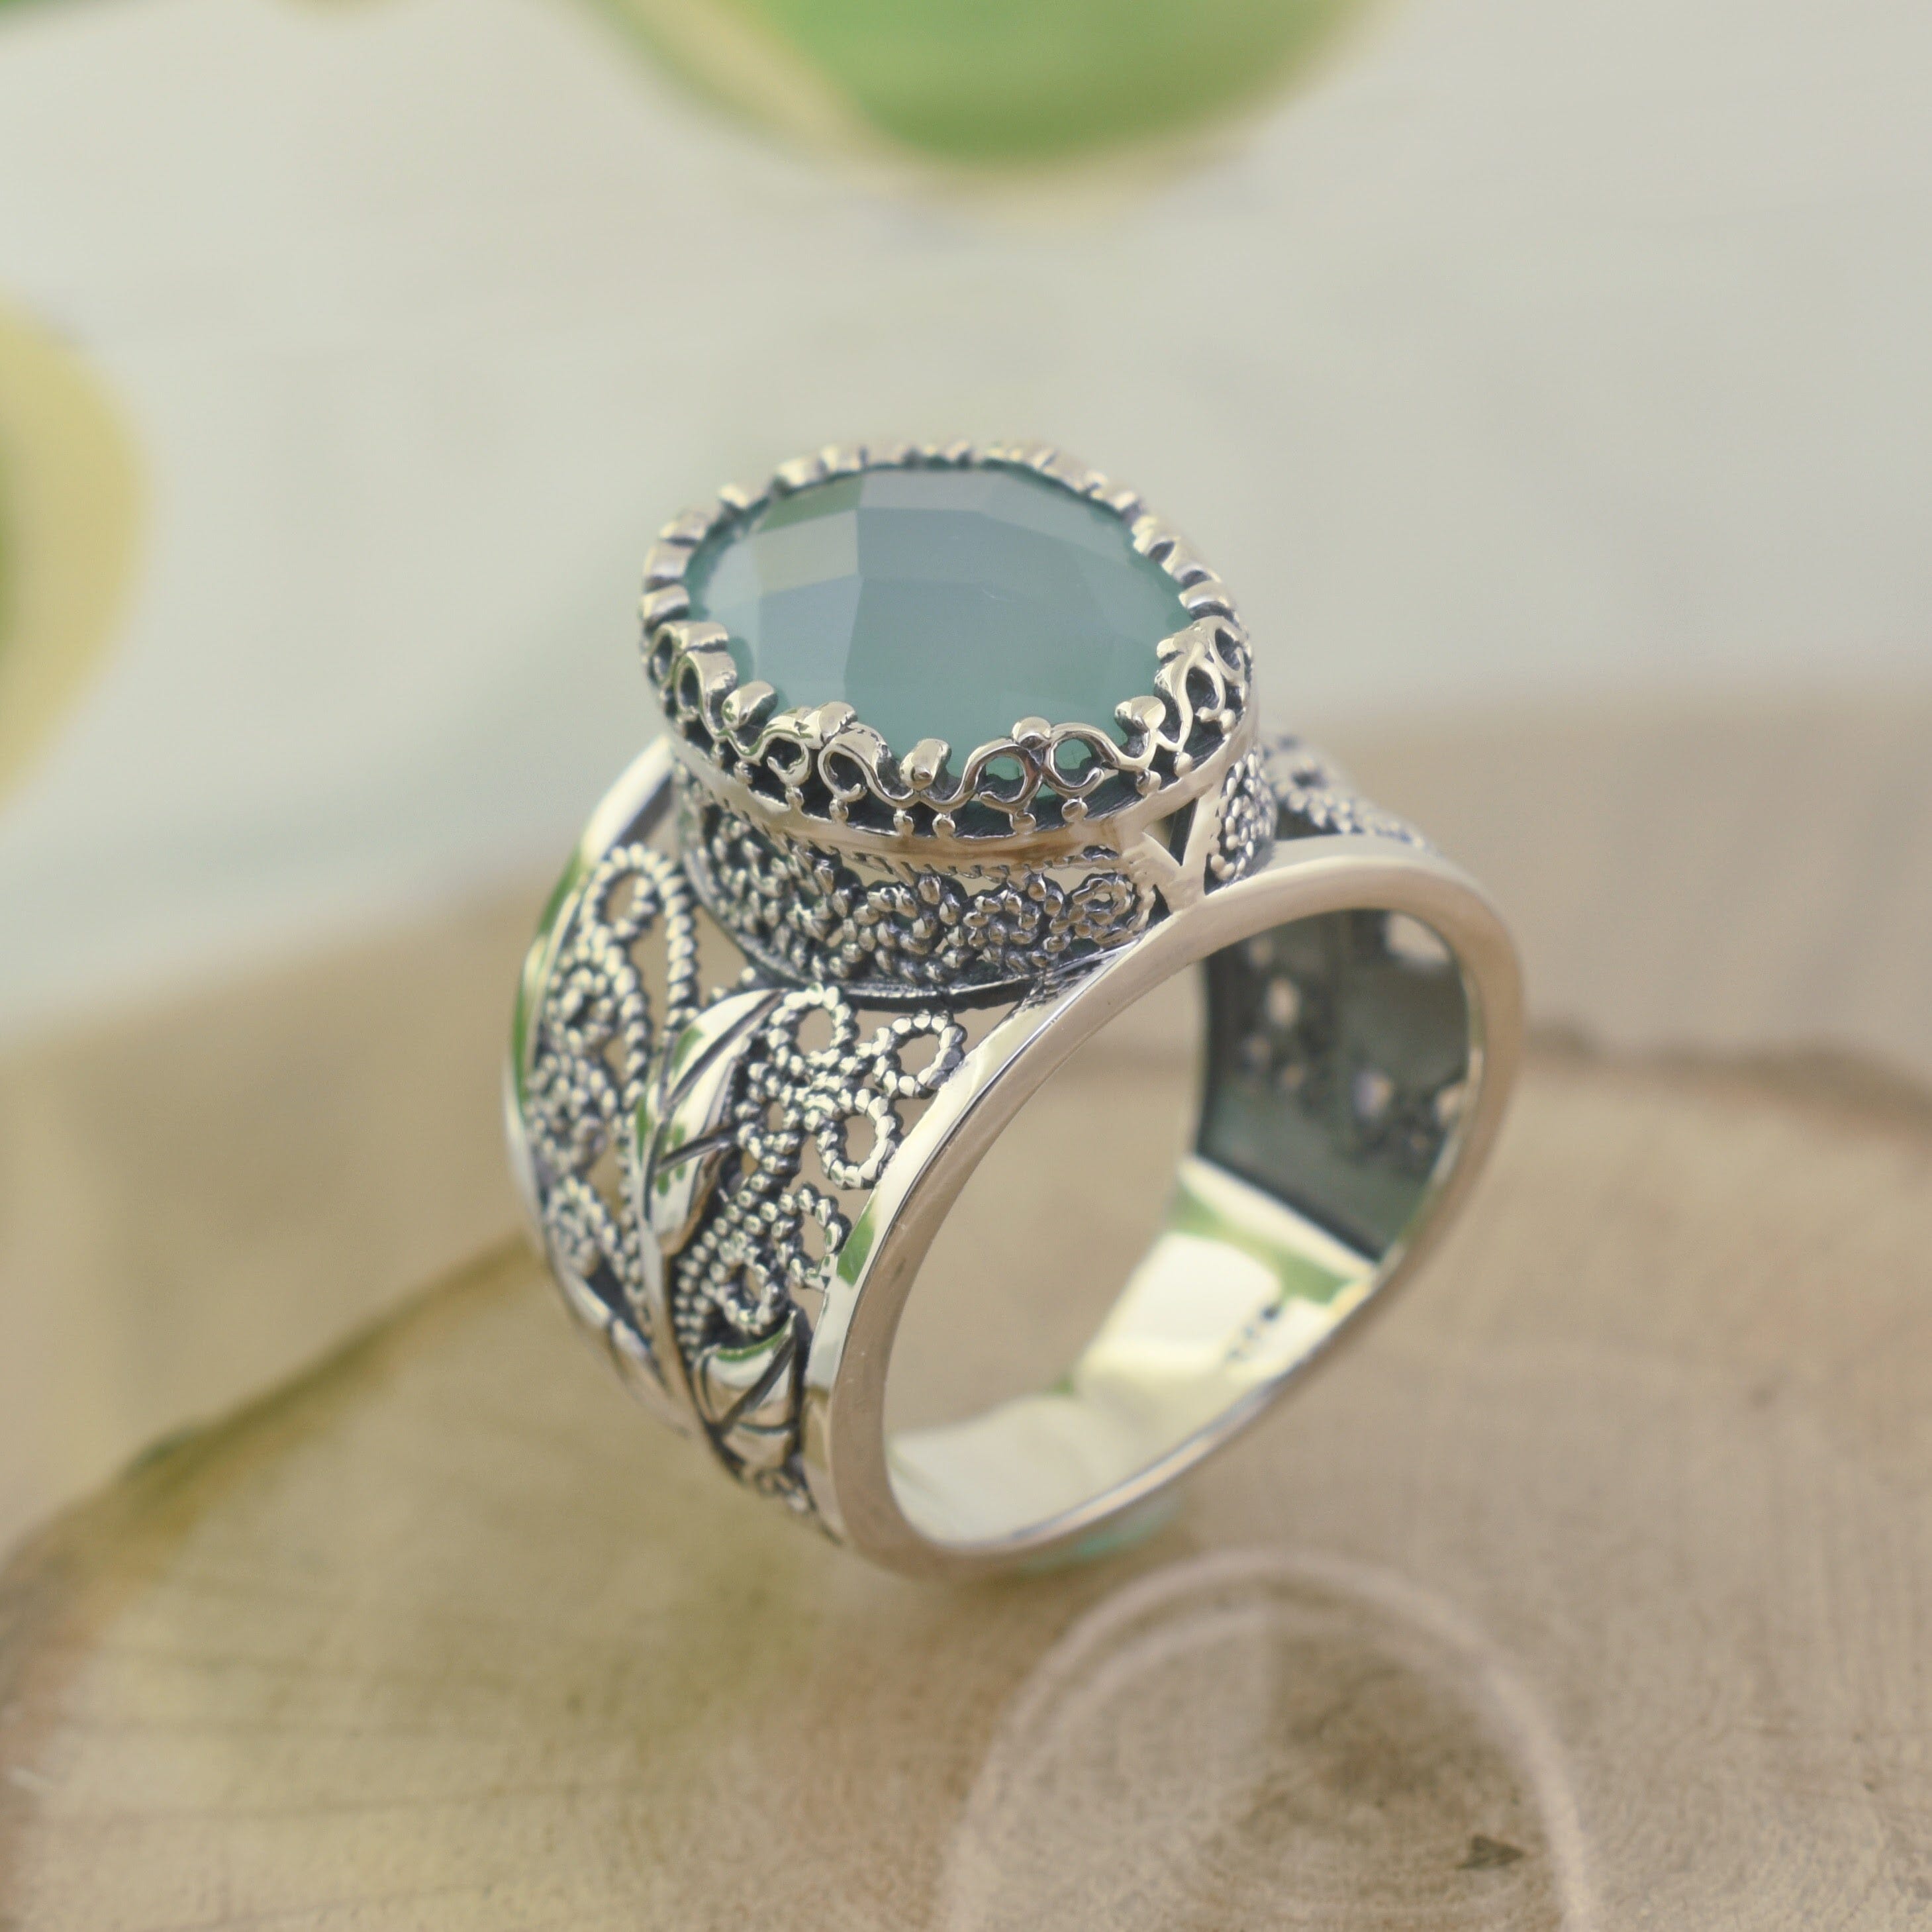 Oval cut aqua glam ring set in antiqued sterling silver